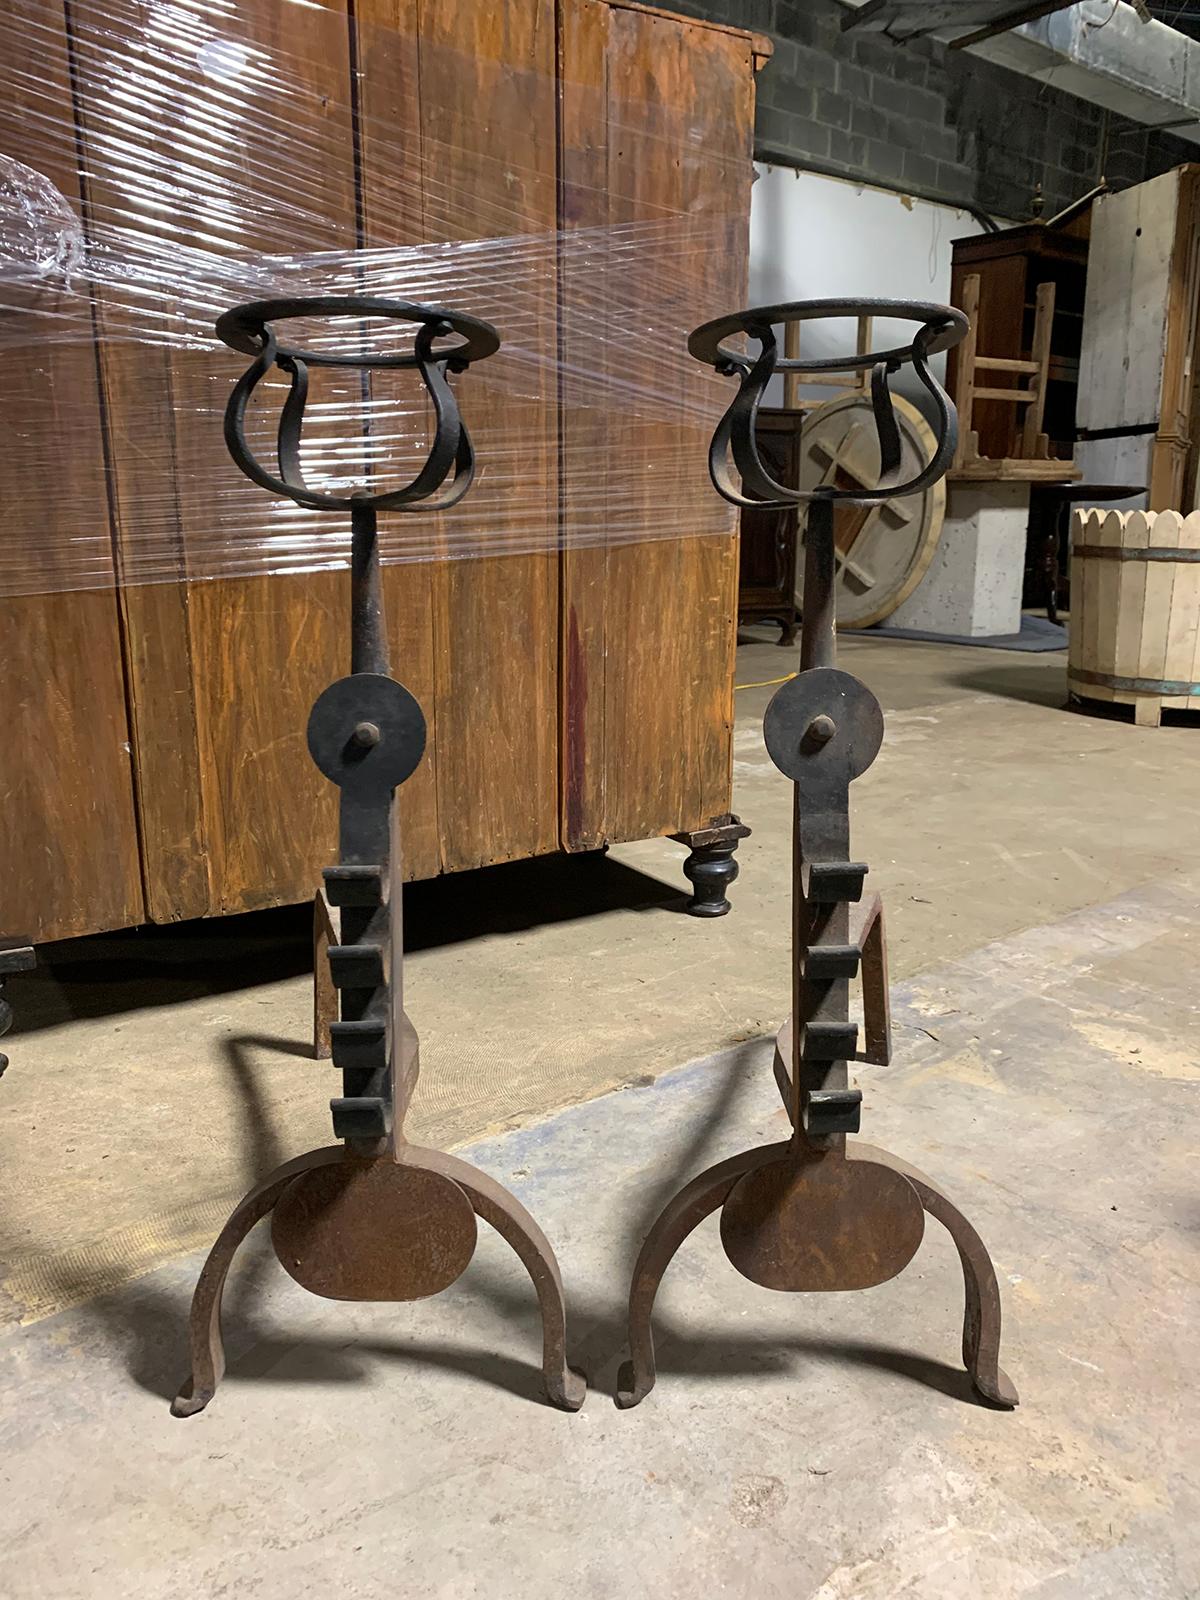 Pair of iron andirons with port warmers and roll bar supports, circa 1900.